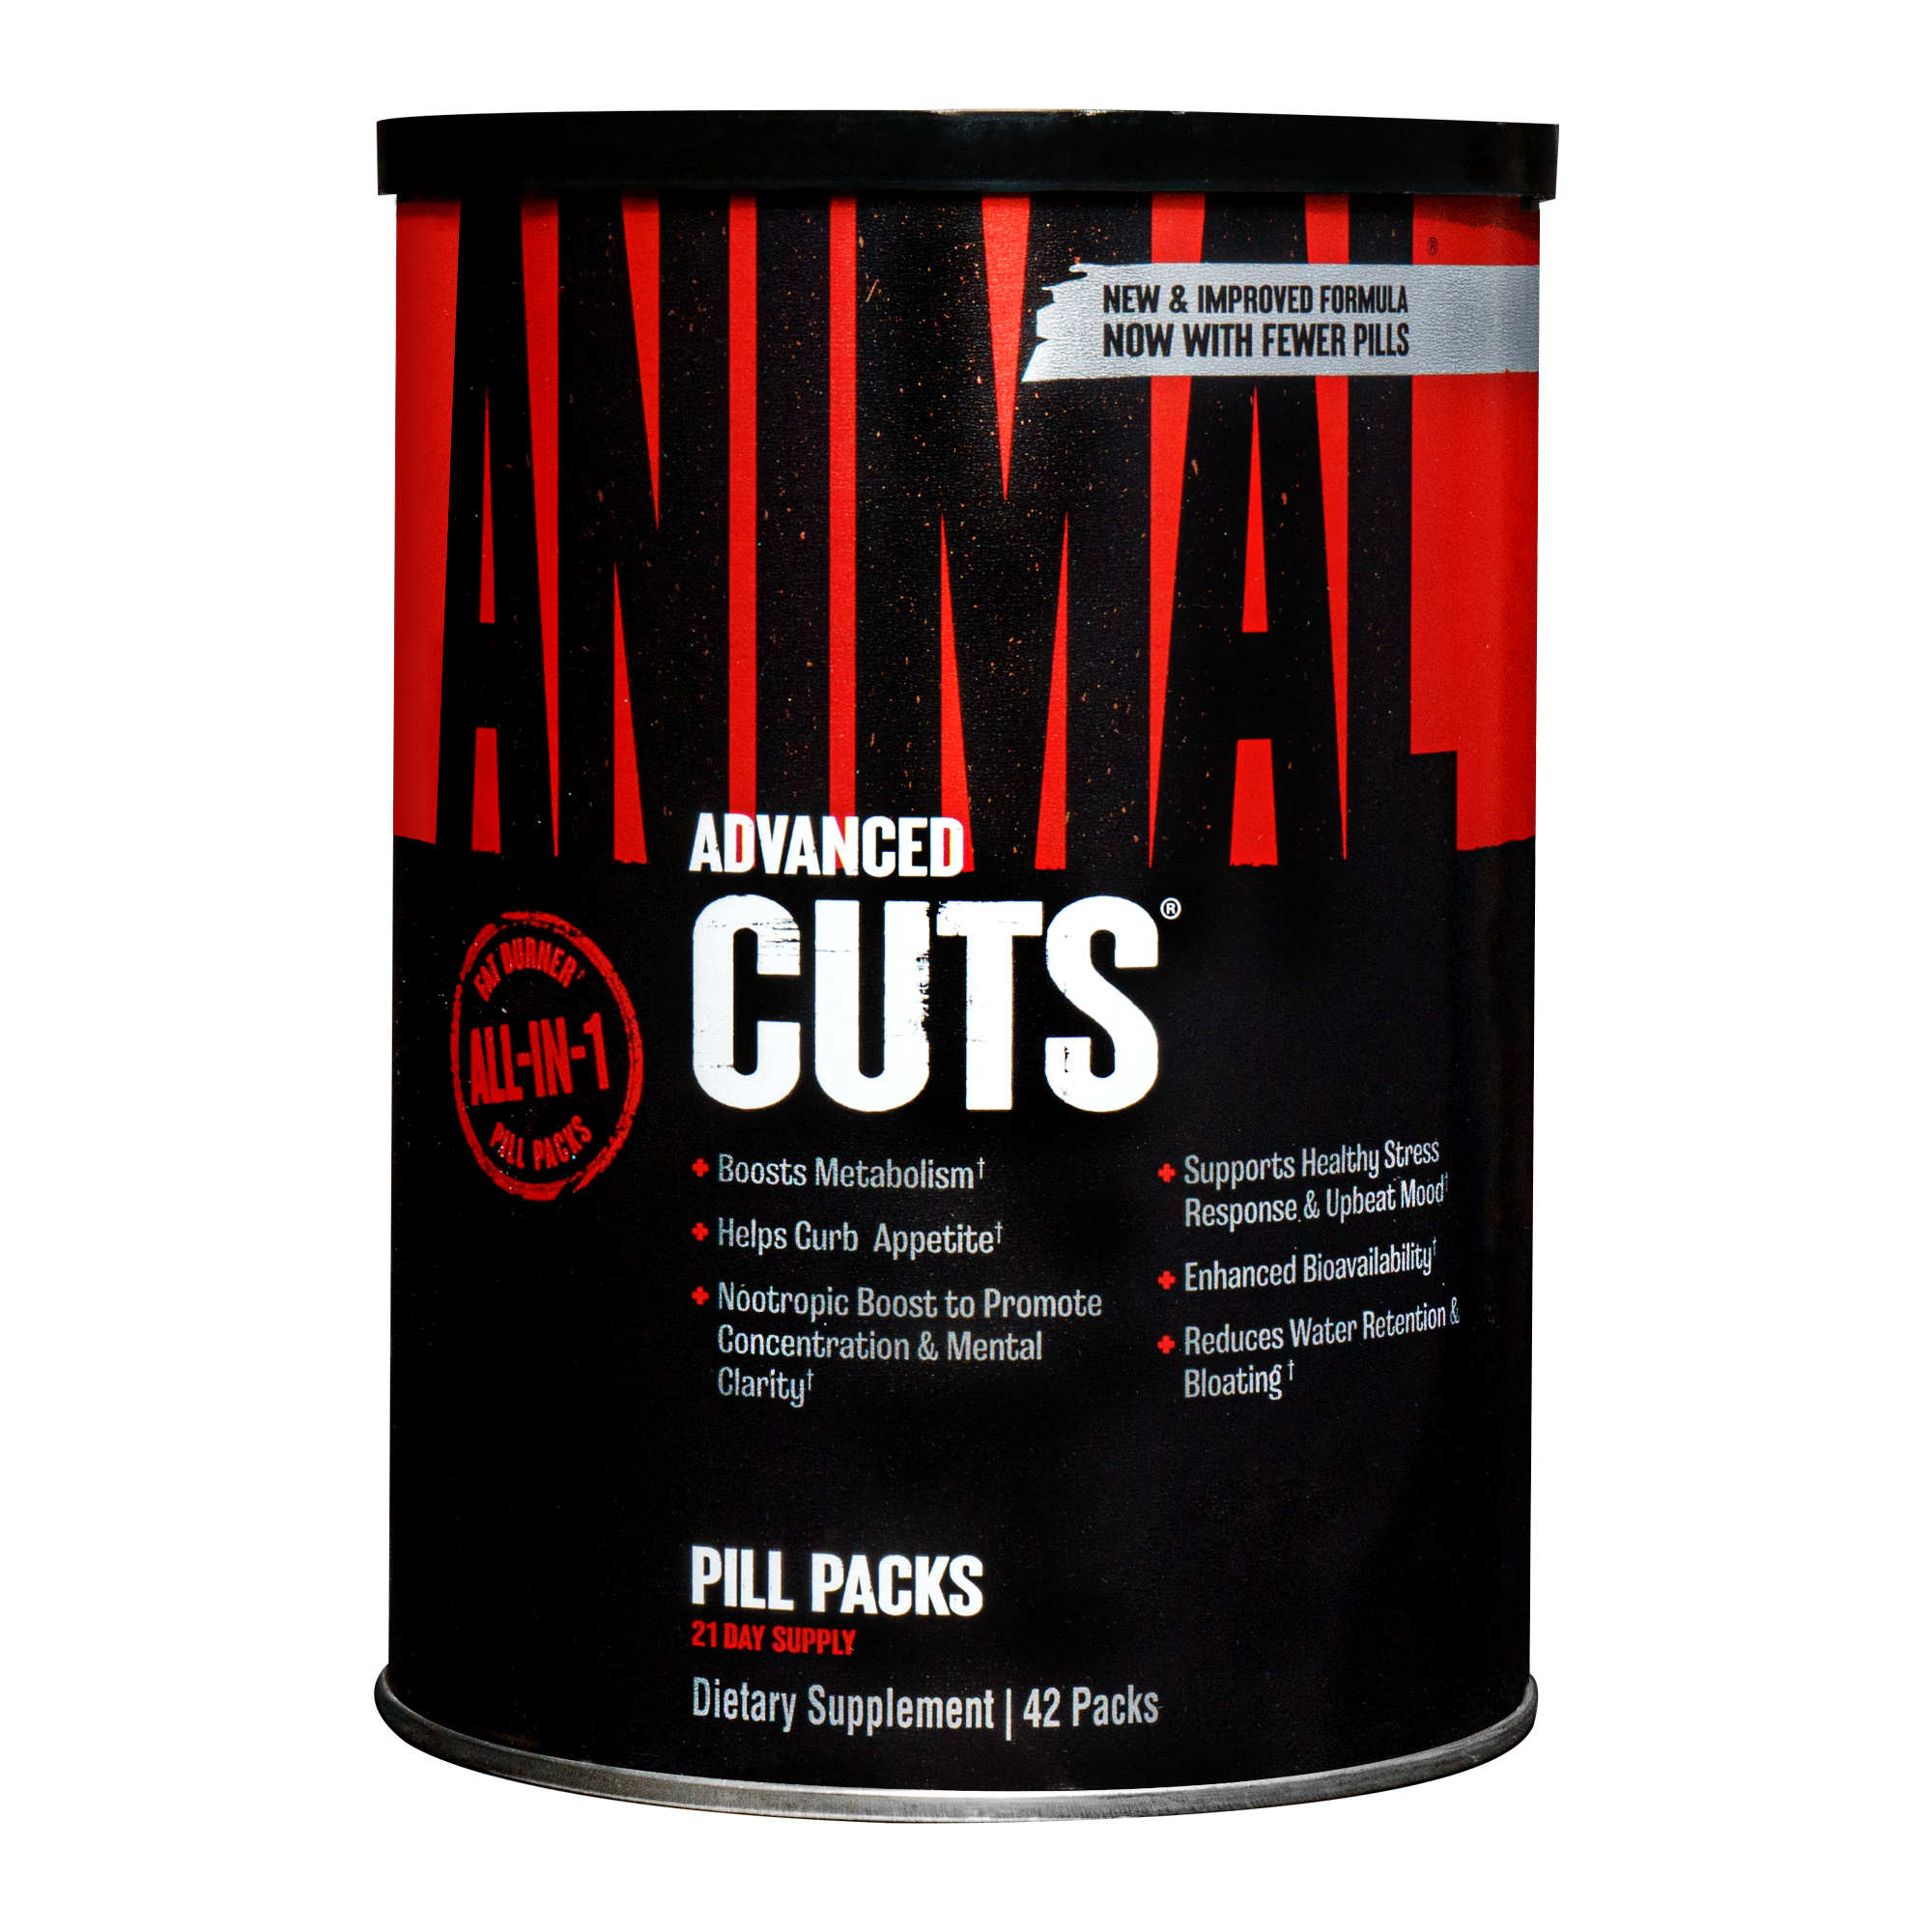 Animal Pak, 44 Packets, 22 Servings by Universal Nutrition 1